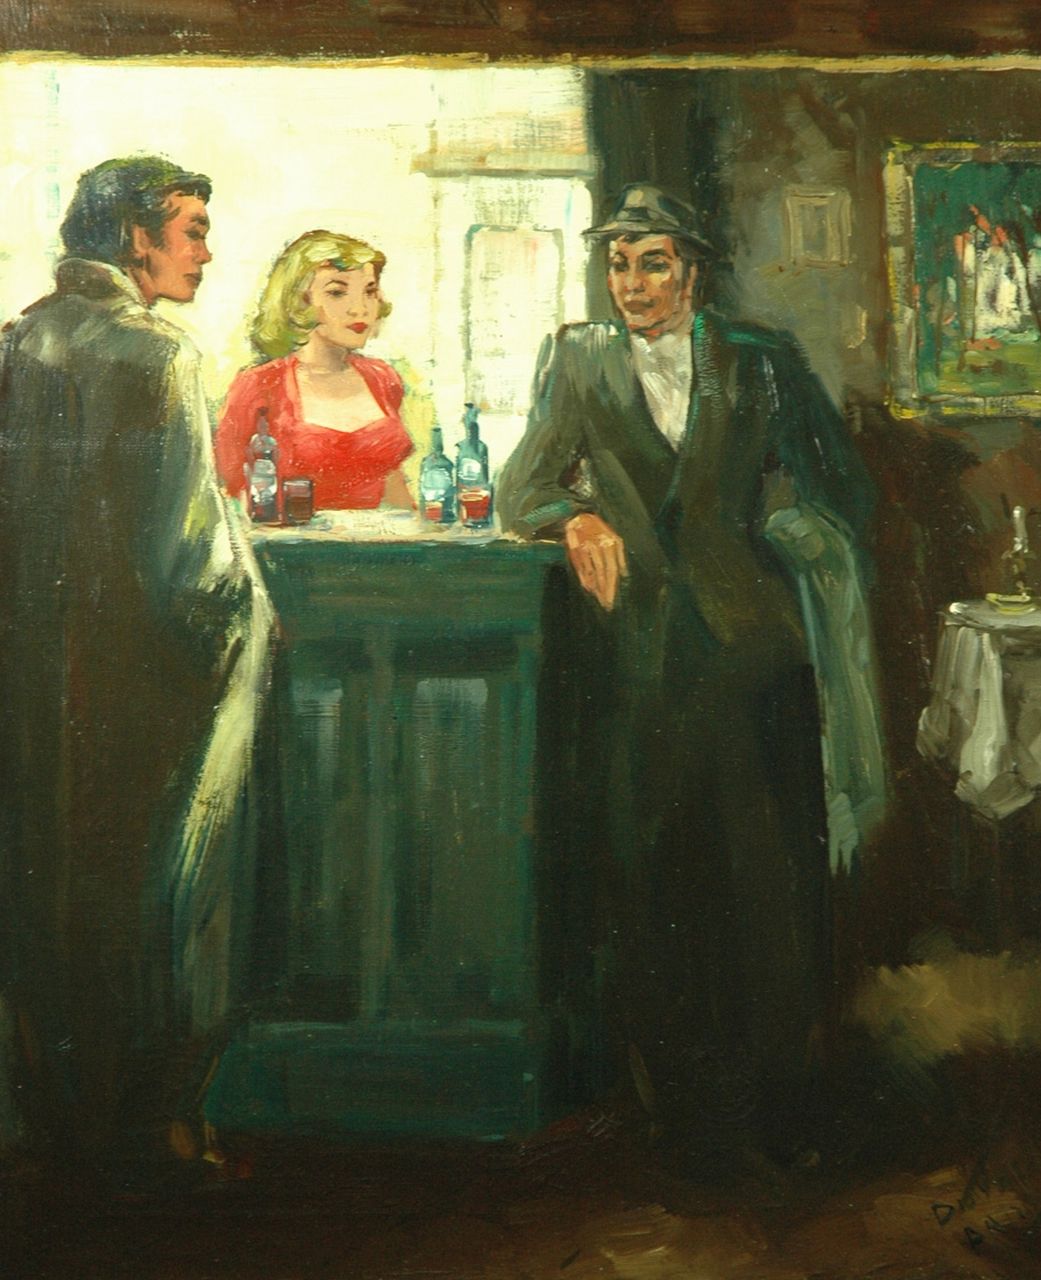 Duval   | Duval, Talking at the bar, oil on canvas 59.3 x 49.8 cm, signed l.r. Duval